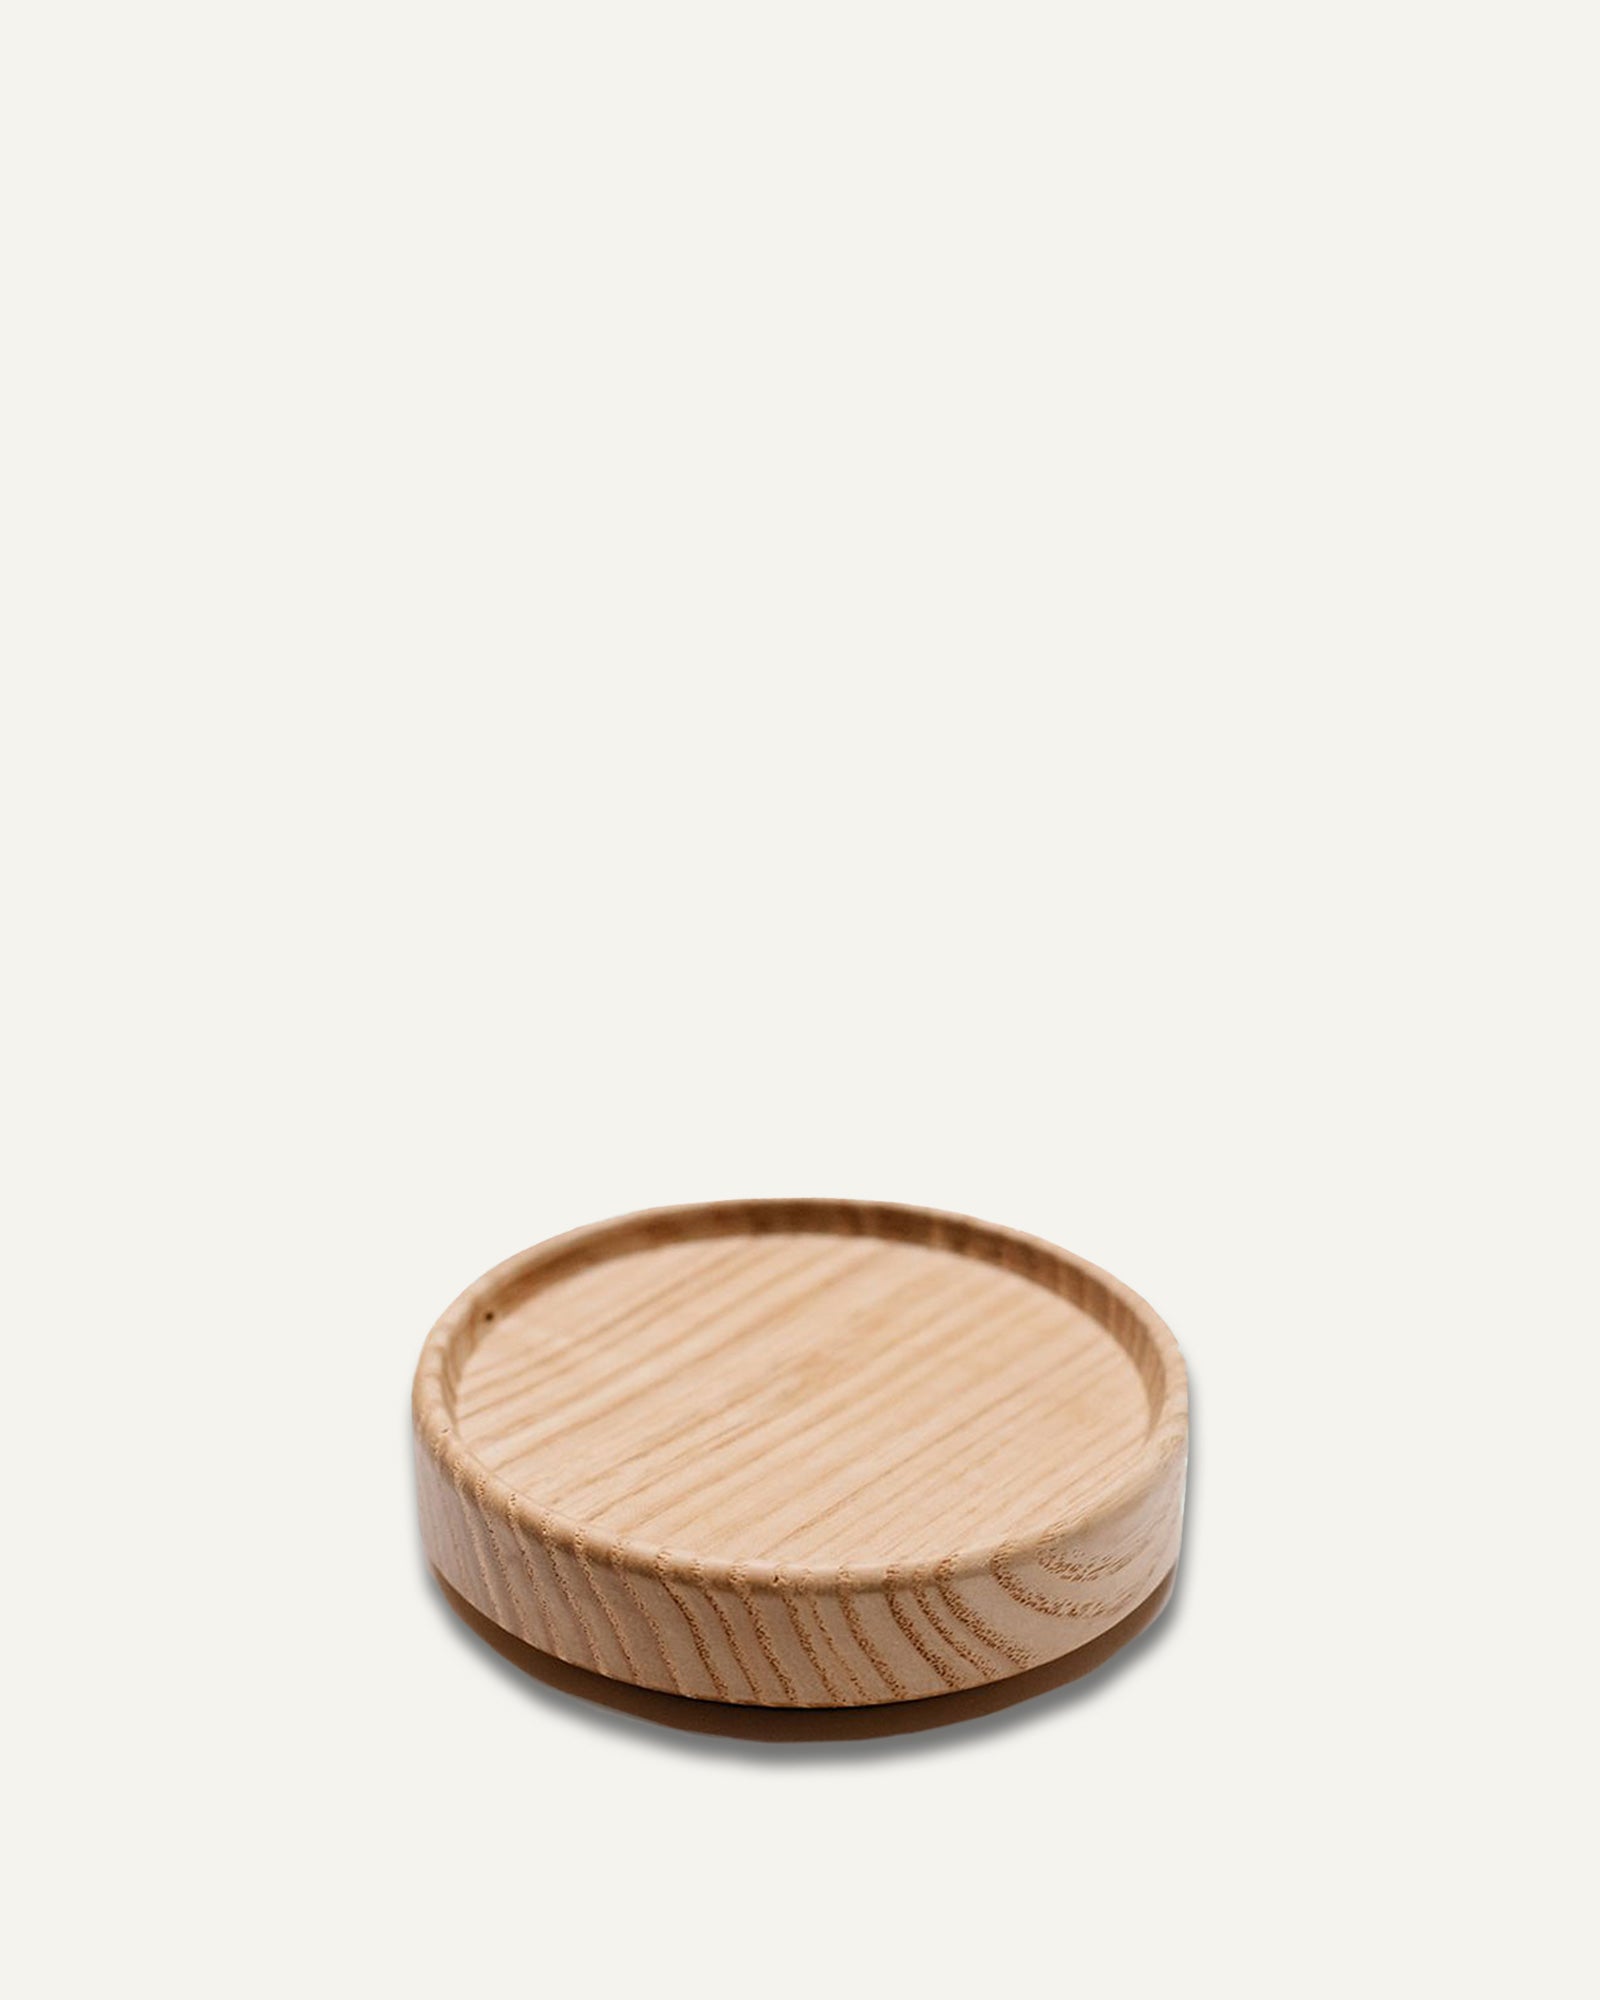 Oak Wood Lid and Coaster, made by Hasami